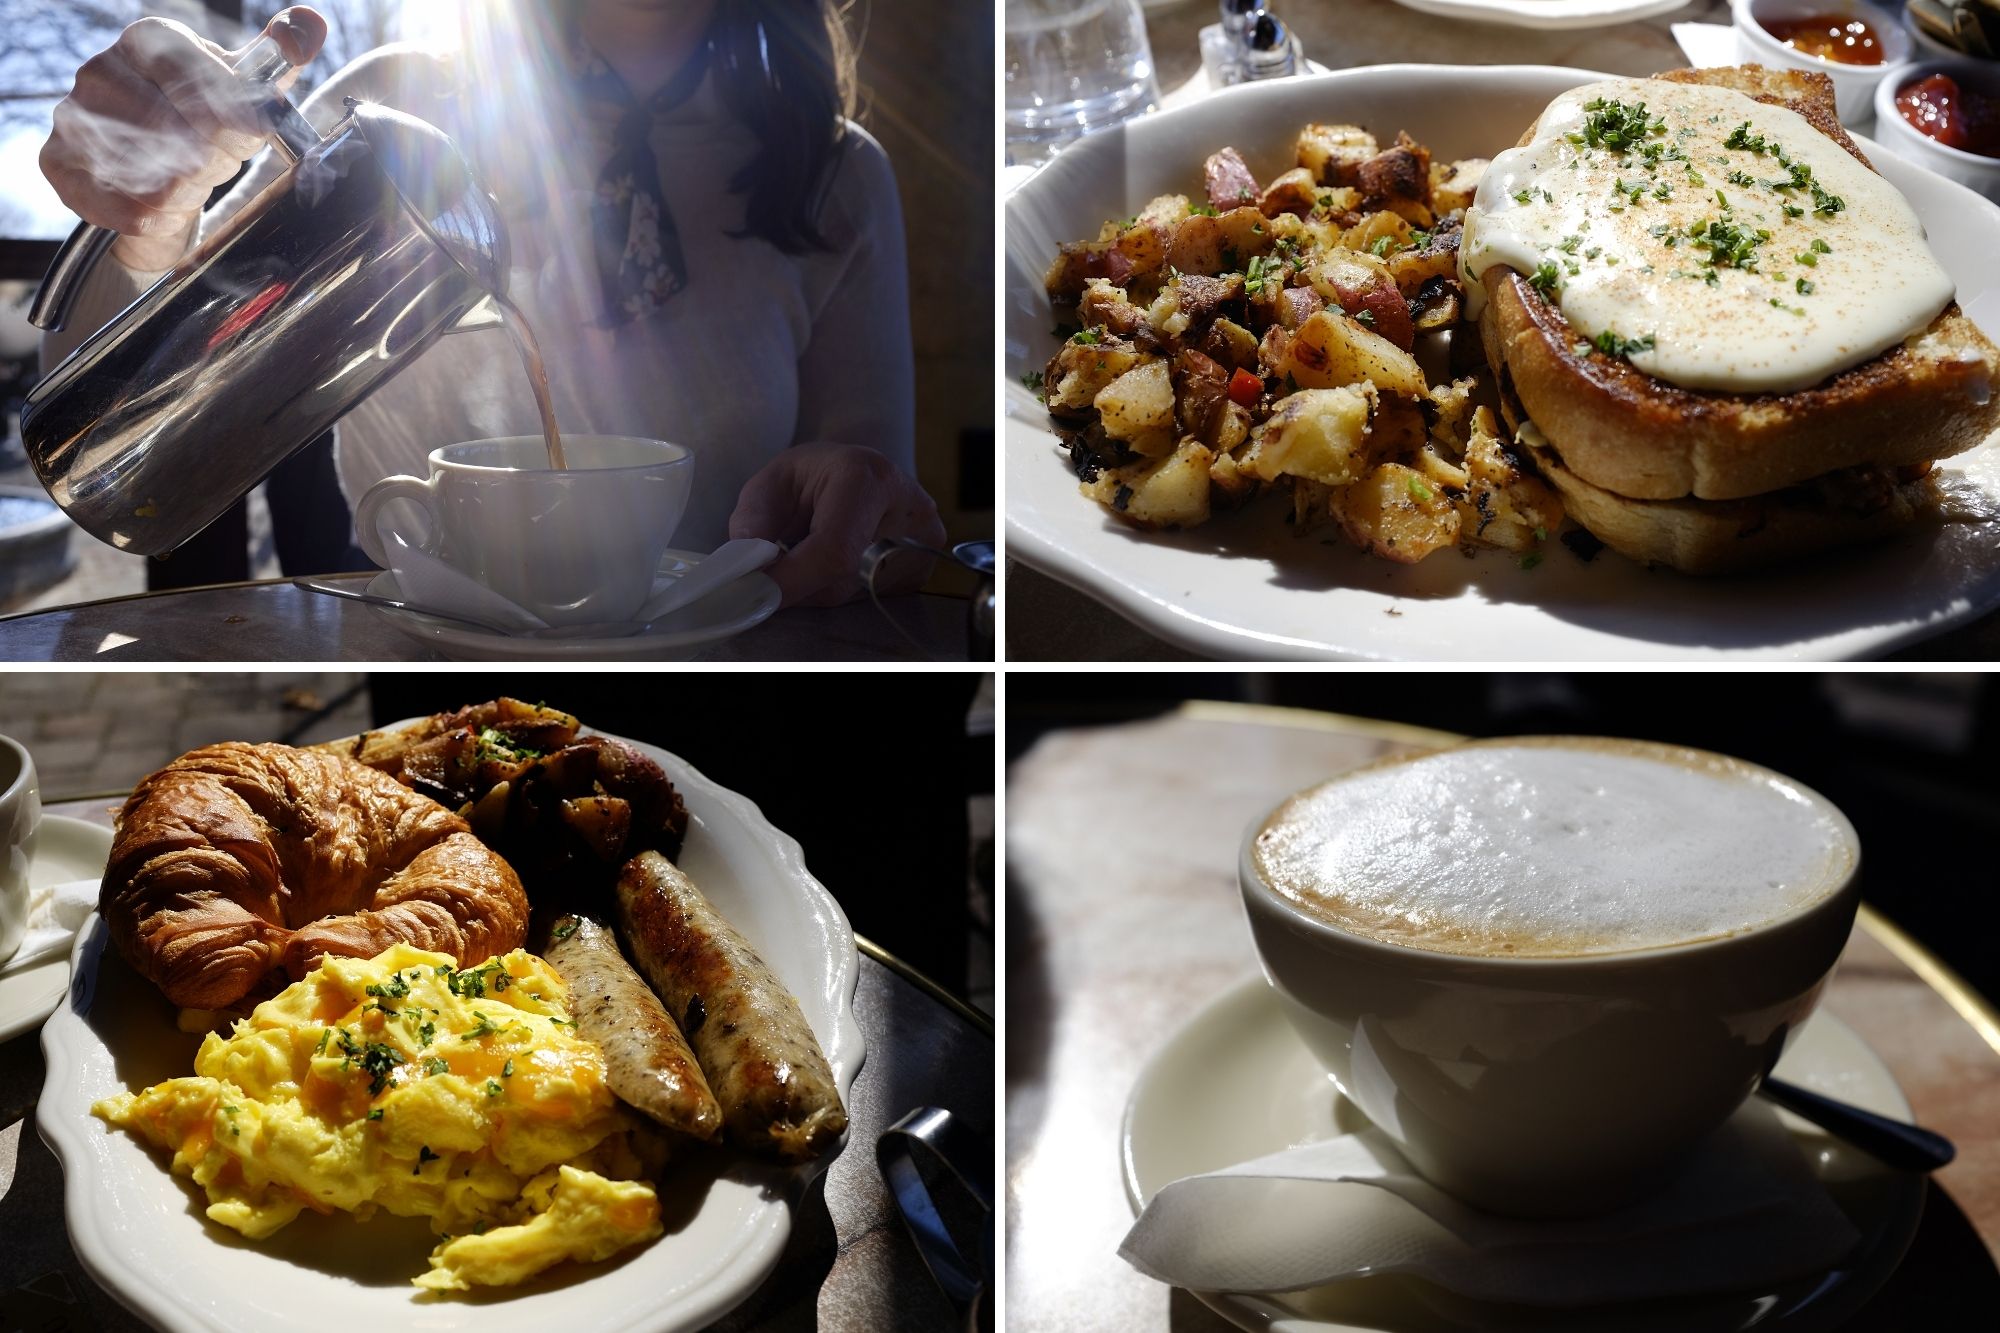 Collage of meals at Cafe Intermezzo